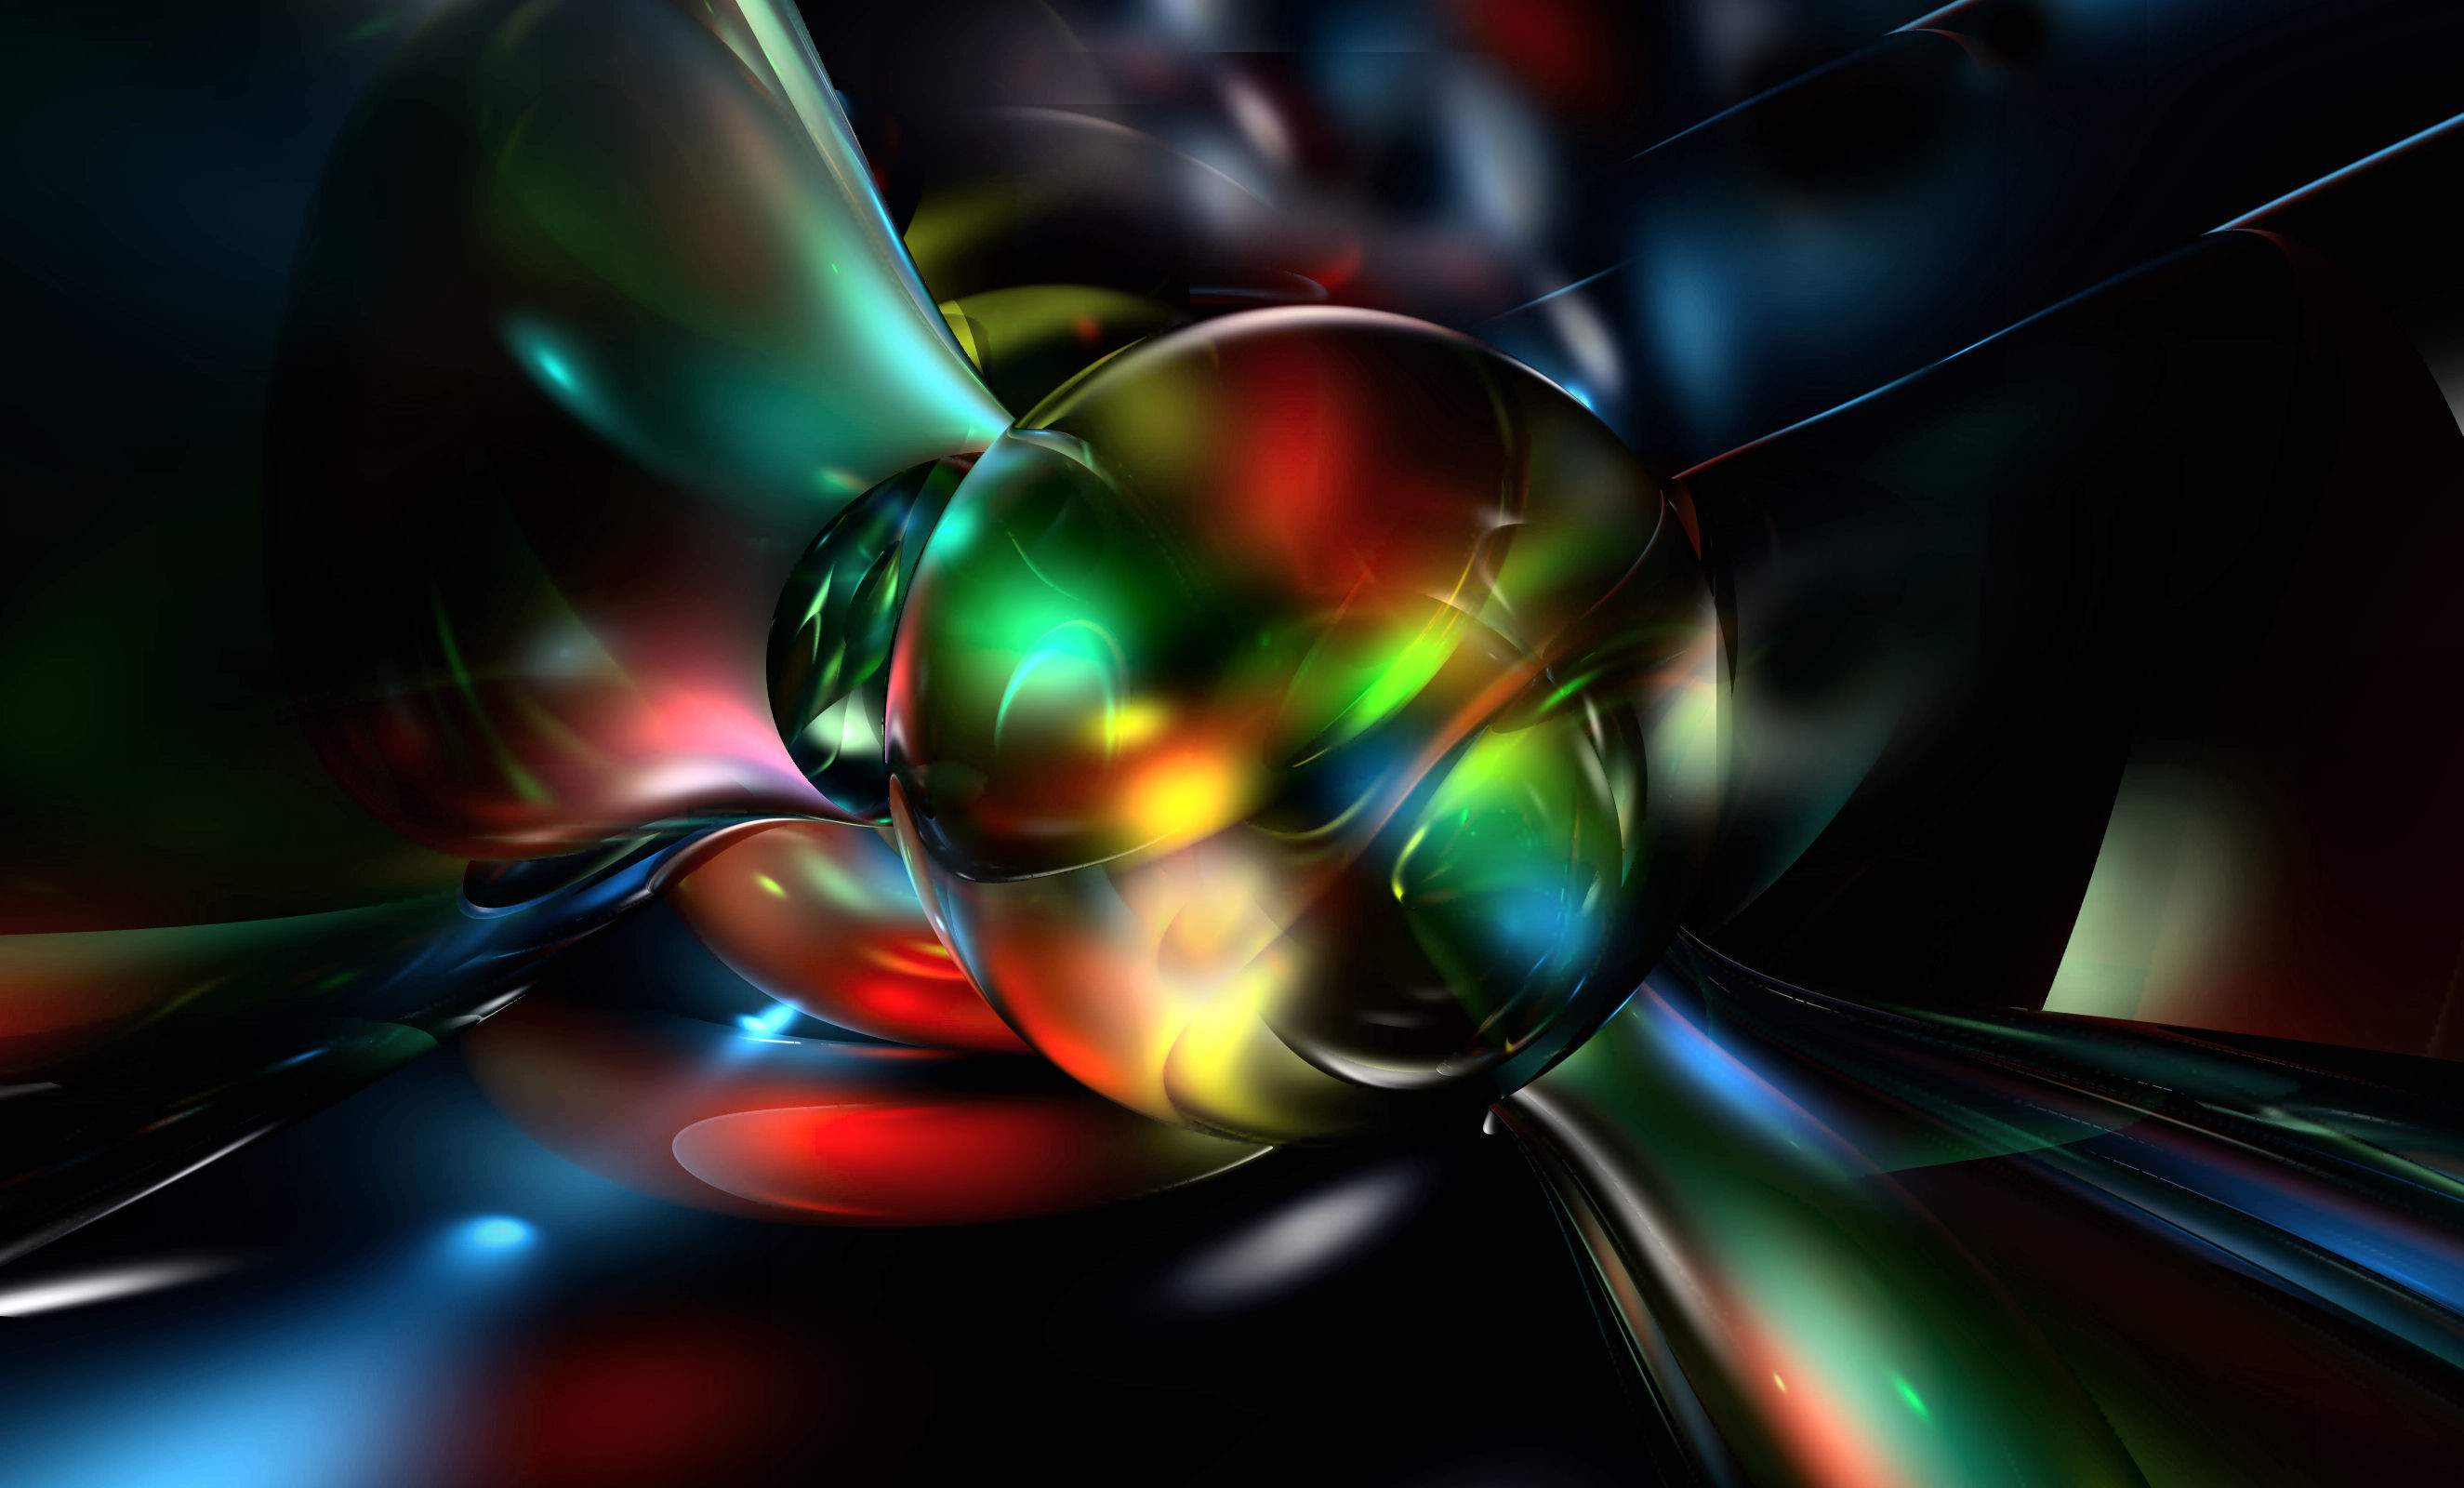 2650x1600 really cool awesome abstract 3d desktop wallpaper Car Pictures 